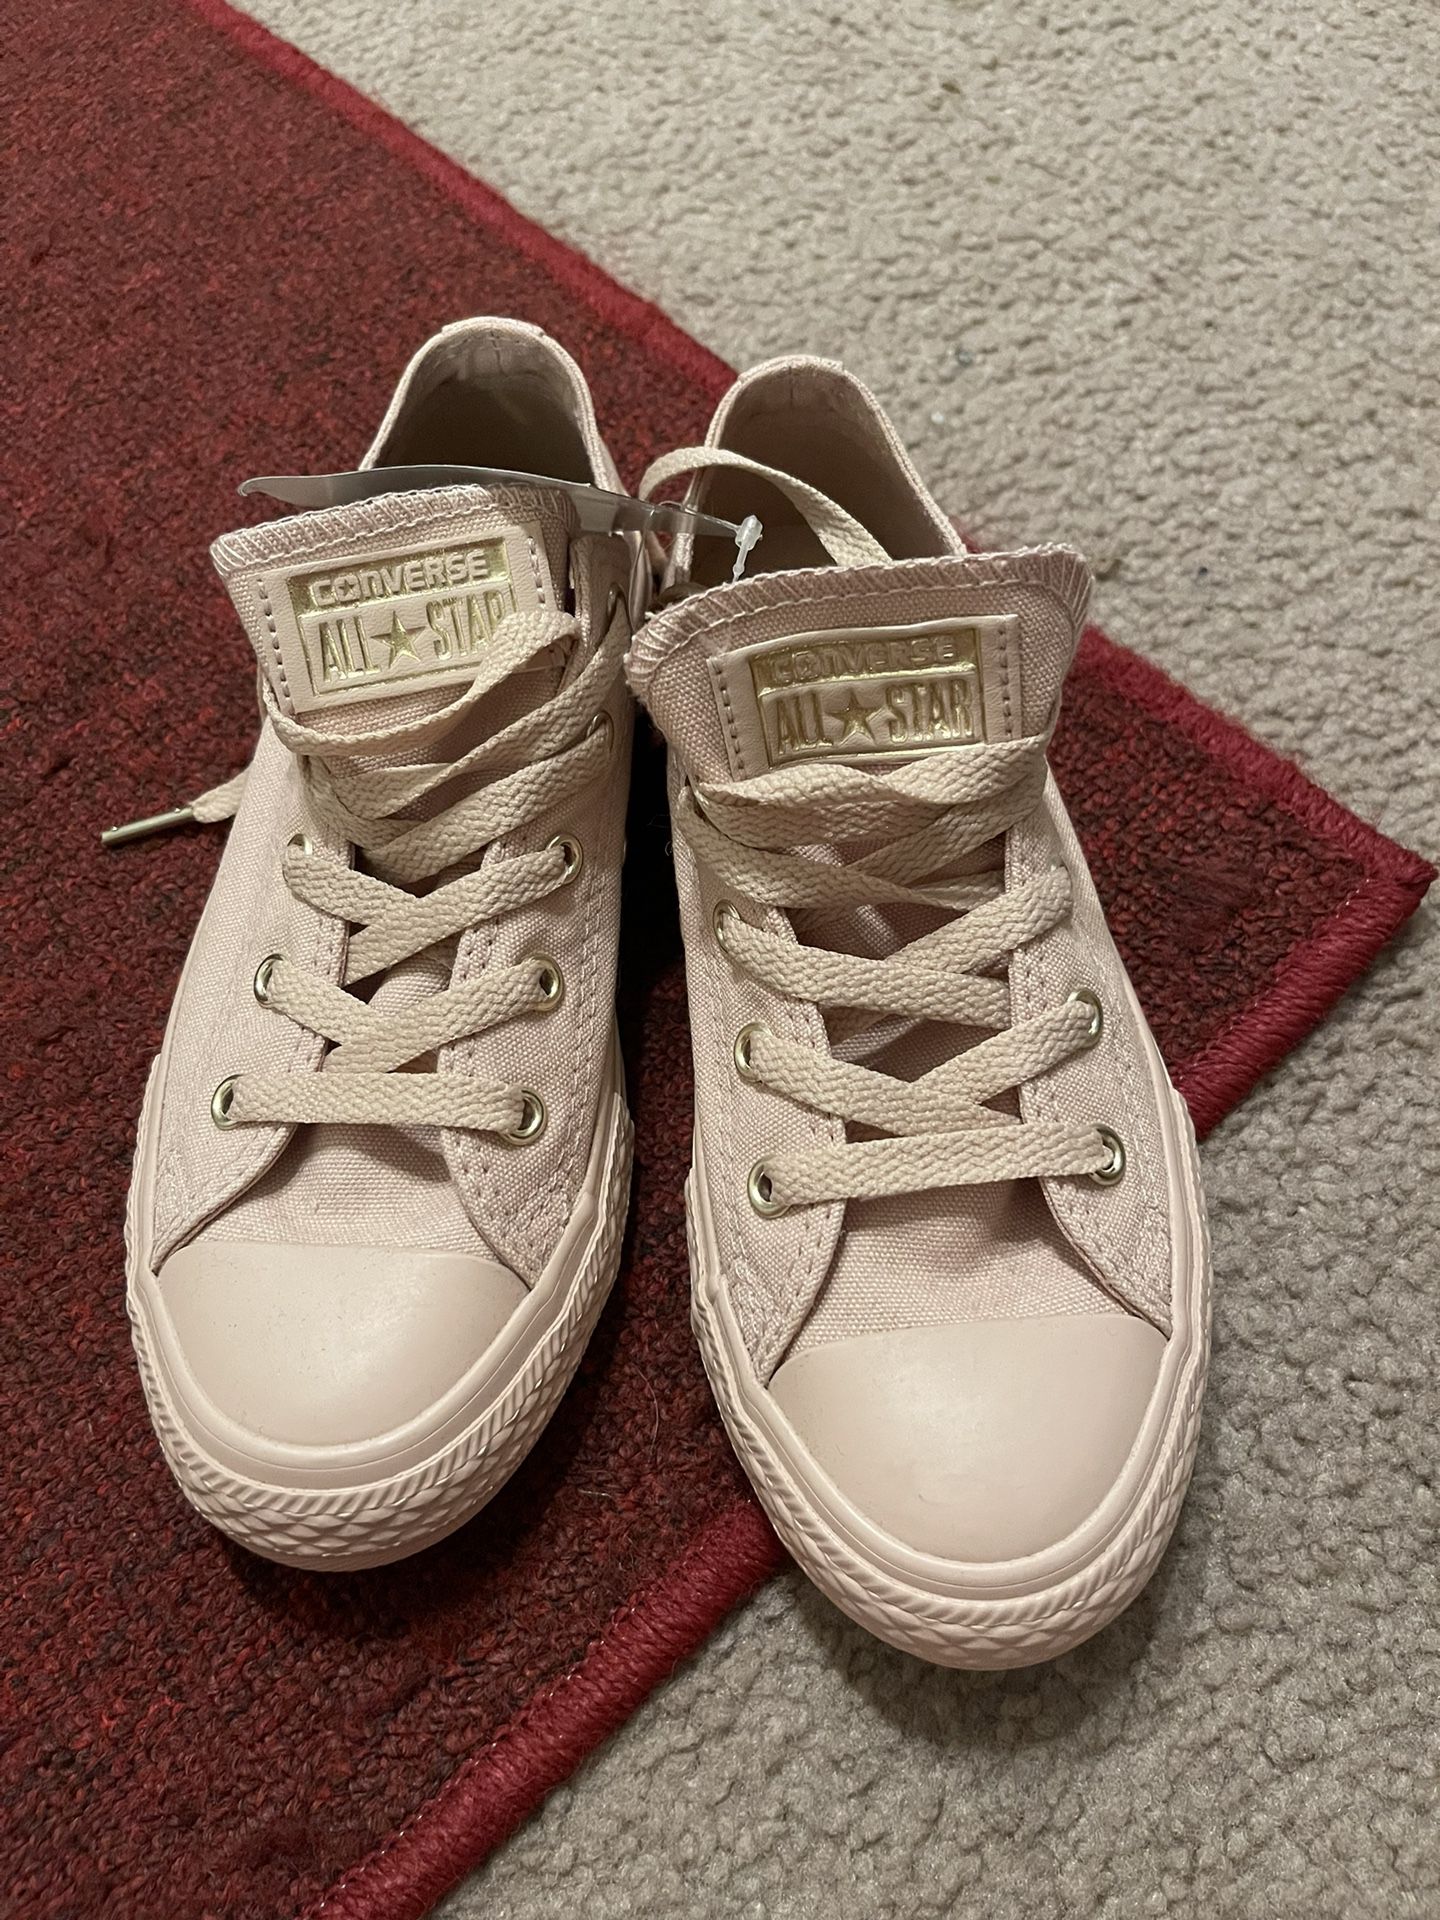 2 Pairs Of Kids Converse Shoes